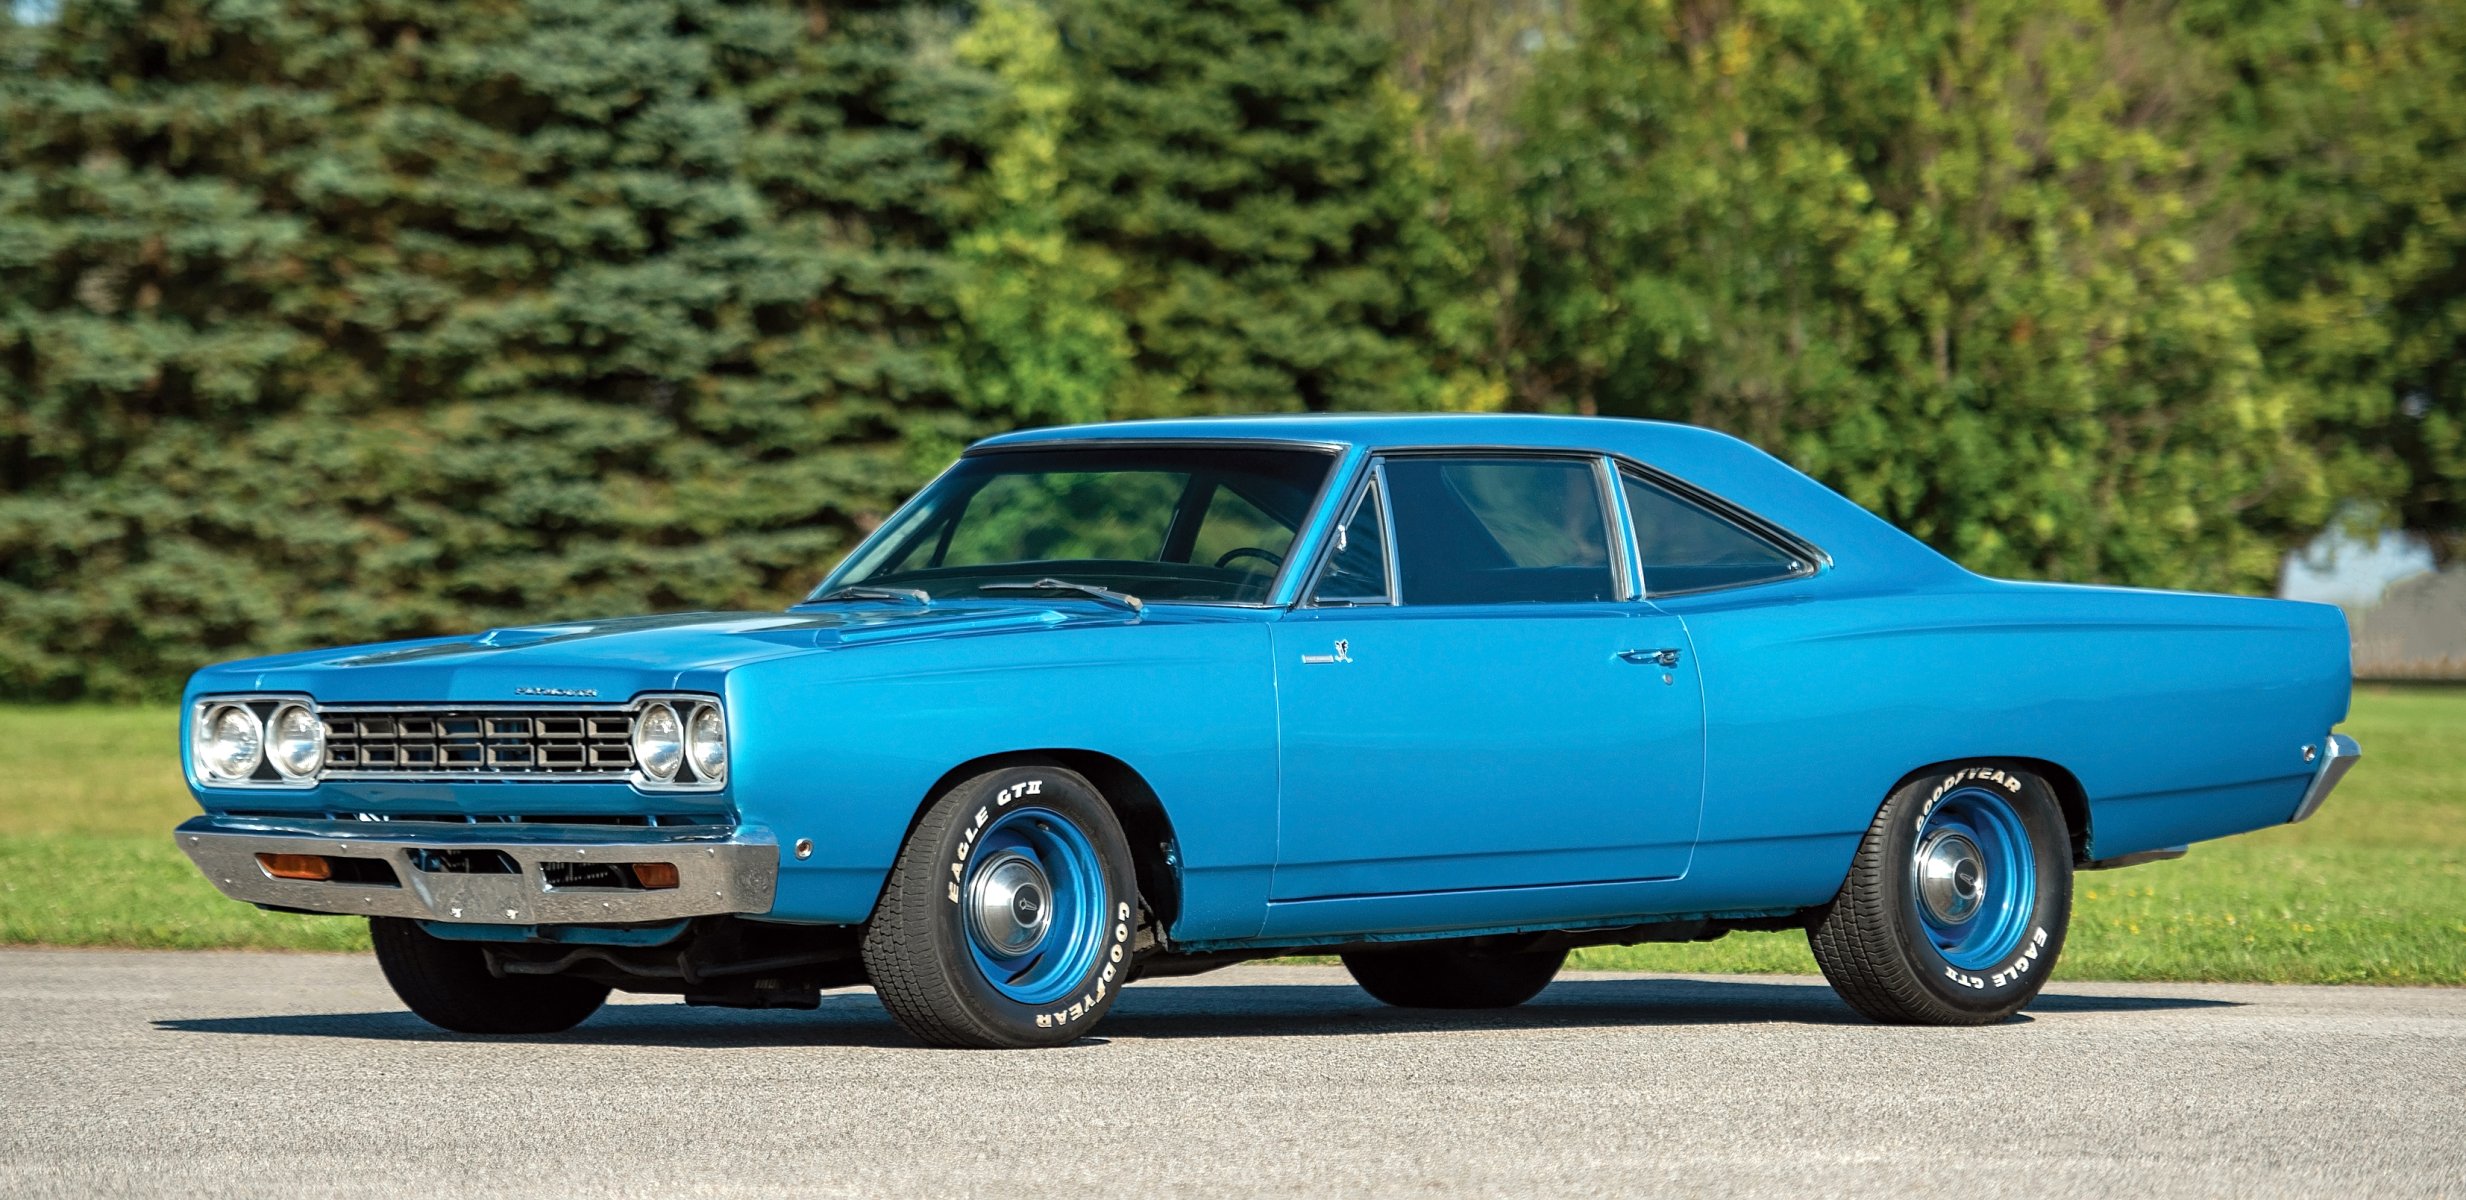 Auburn Fall 2019_4018-1_Plymouth_1968_Road Runner_Coupe_RM21J8A346857_Overal.jpeg